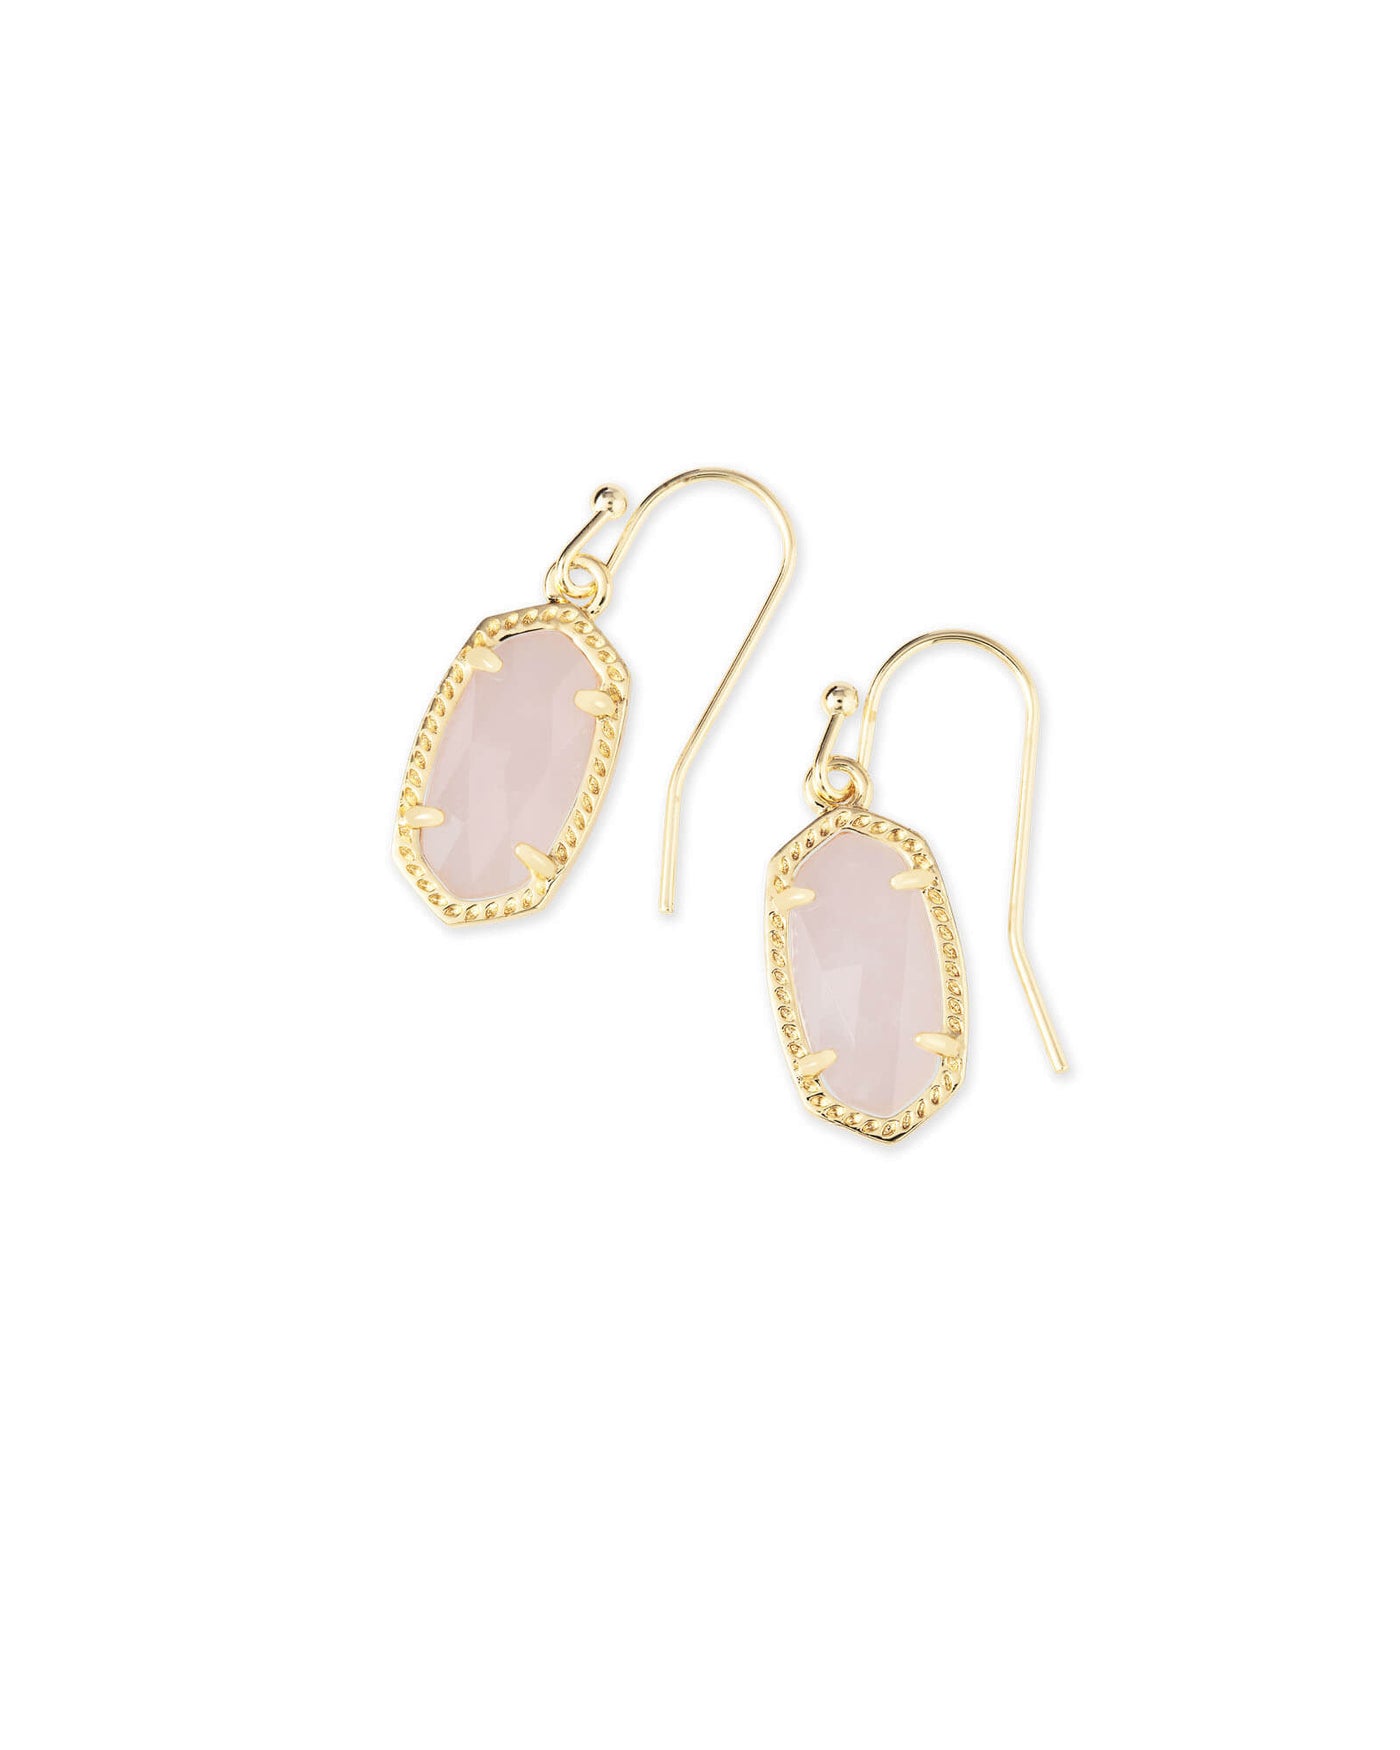 Lee Drop Earrings Gold Rose Quartz on white background, front view.